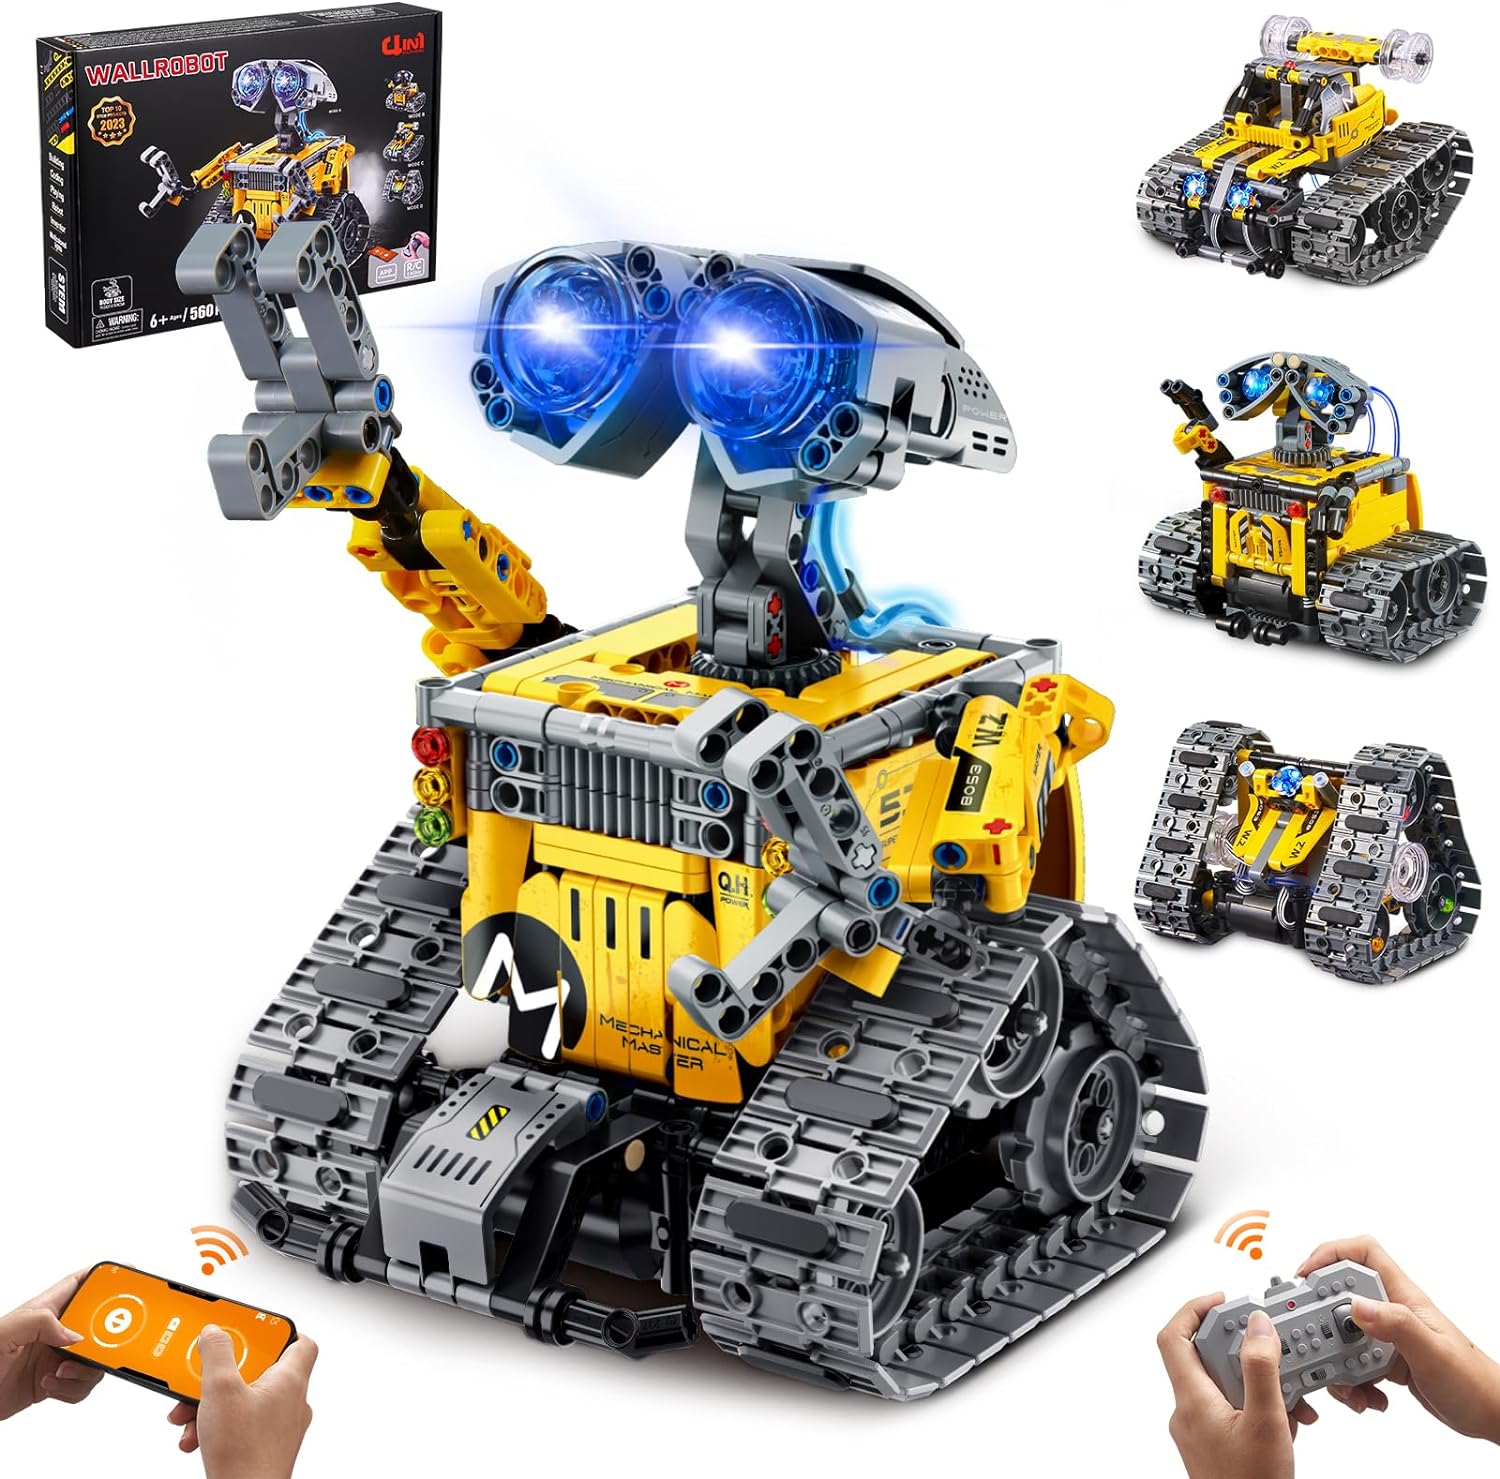 Sillbird STEM Building Toys, 4in1 Remote & APP Controlled Creator Wall Robot Toys Set, Creative Gifts for Boys Girls Kids Aged 6 7 8-12, New 2023 (560 Pieces)